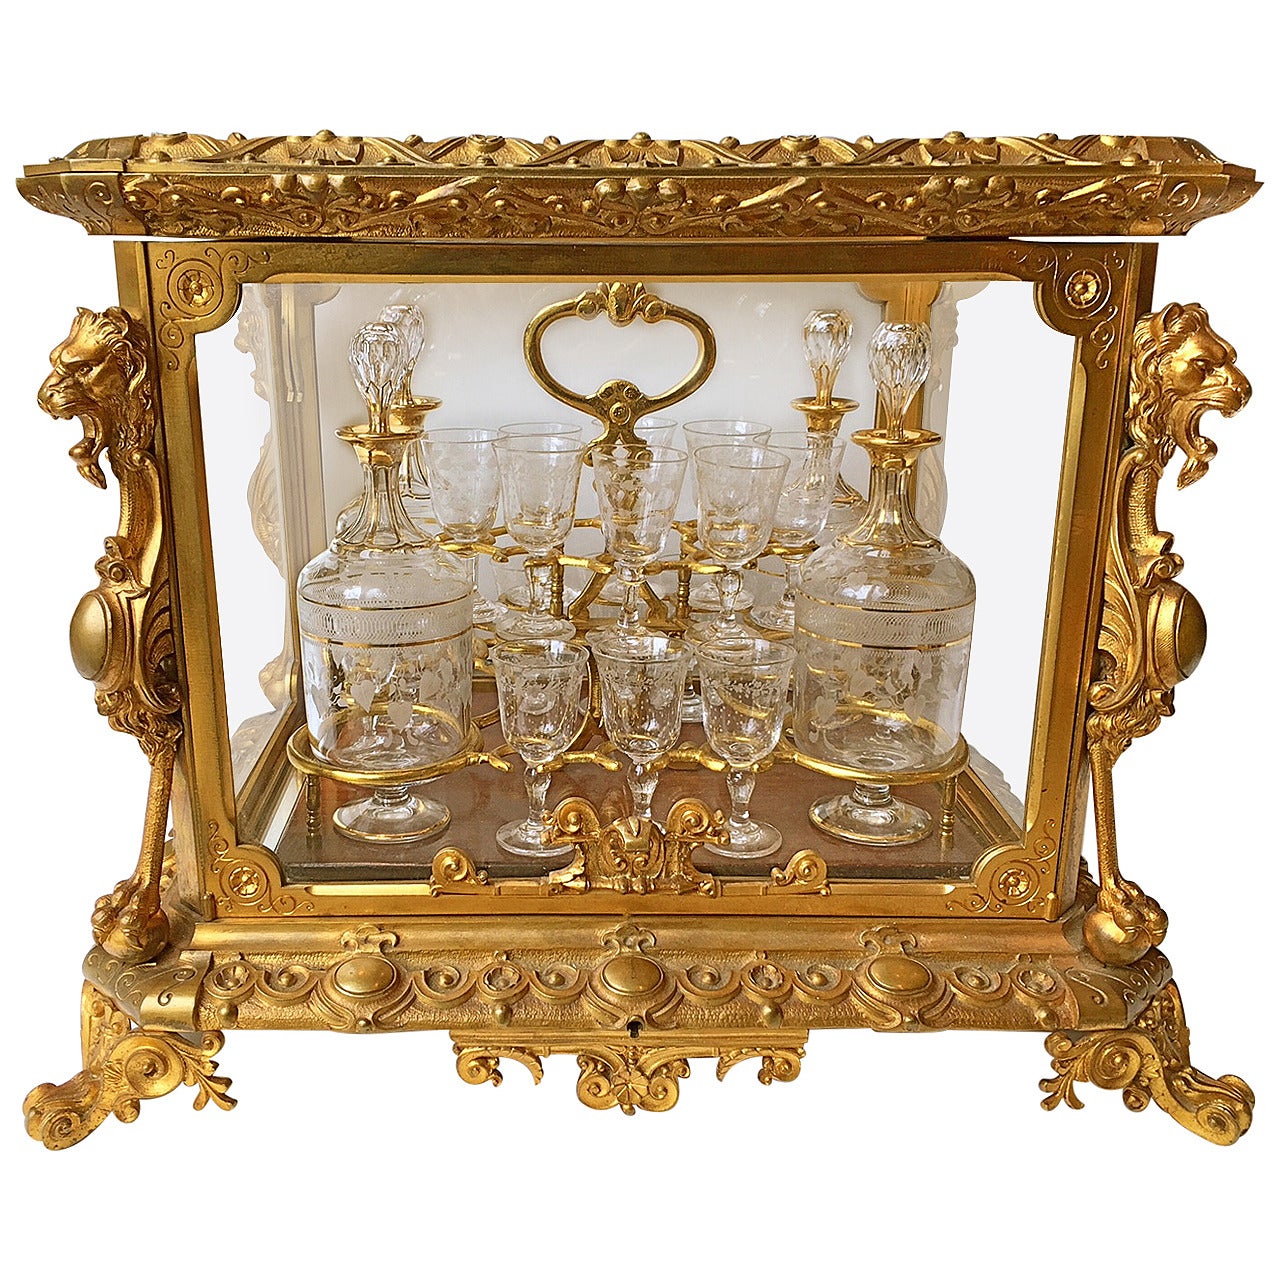  French Gilt Bronze Tantalus Drinking Set 19th Century Massive For Sale